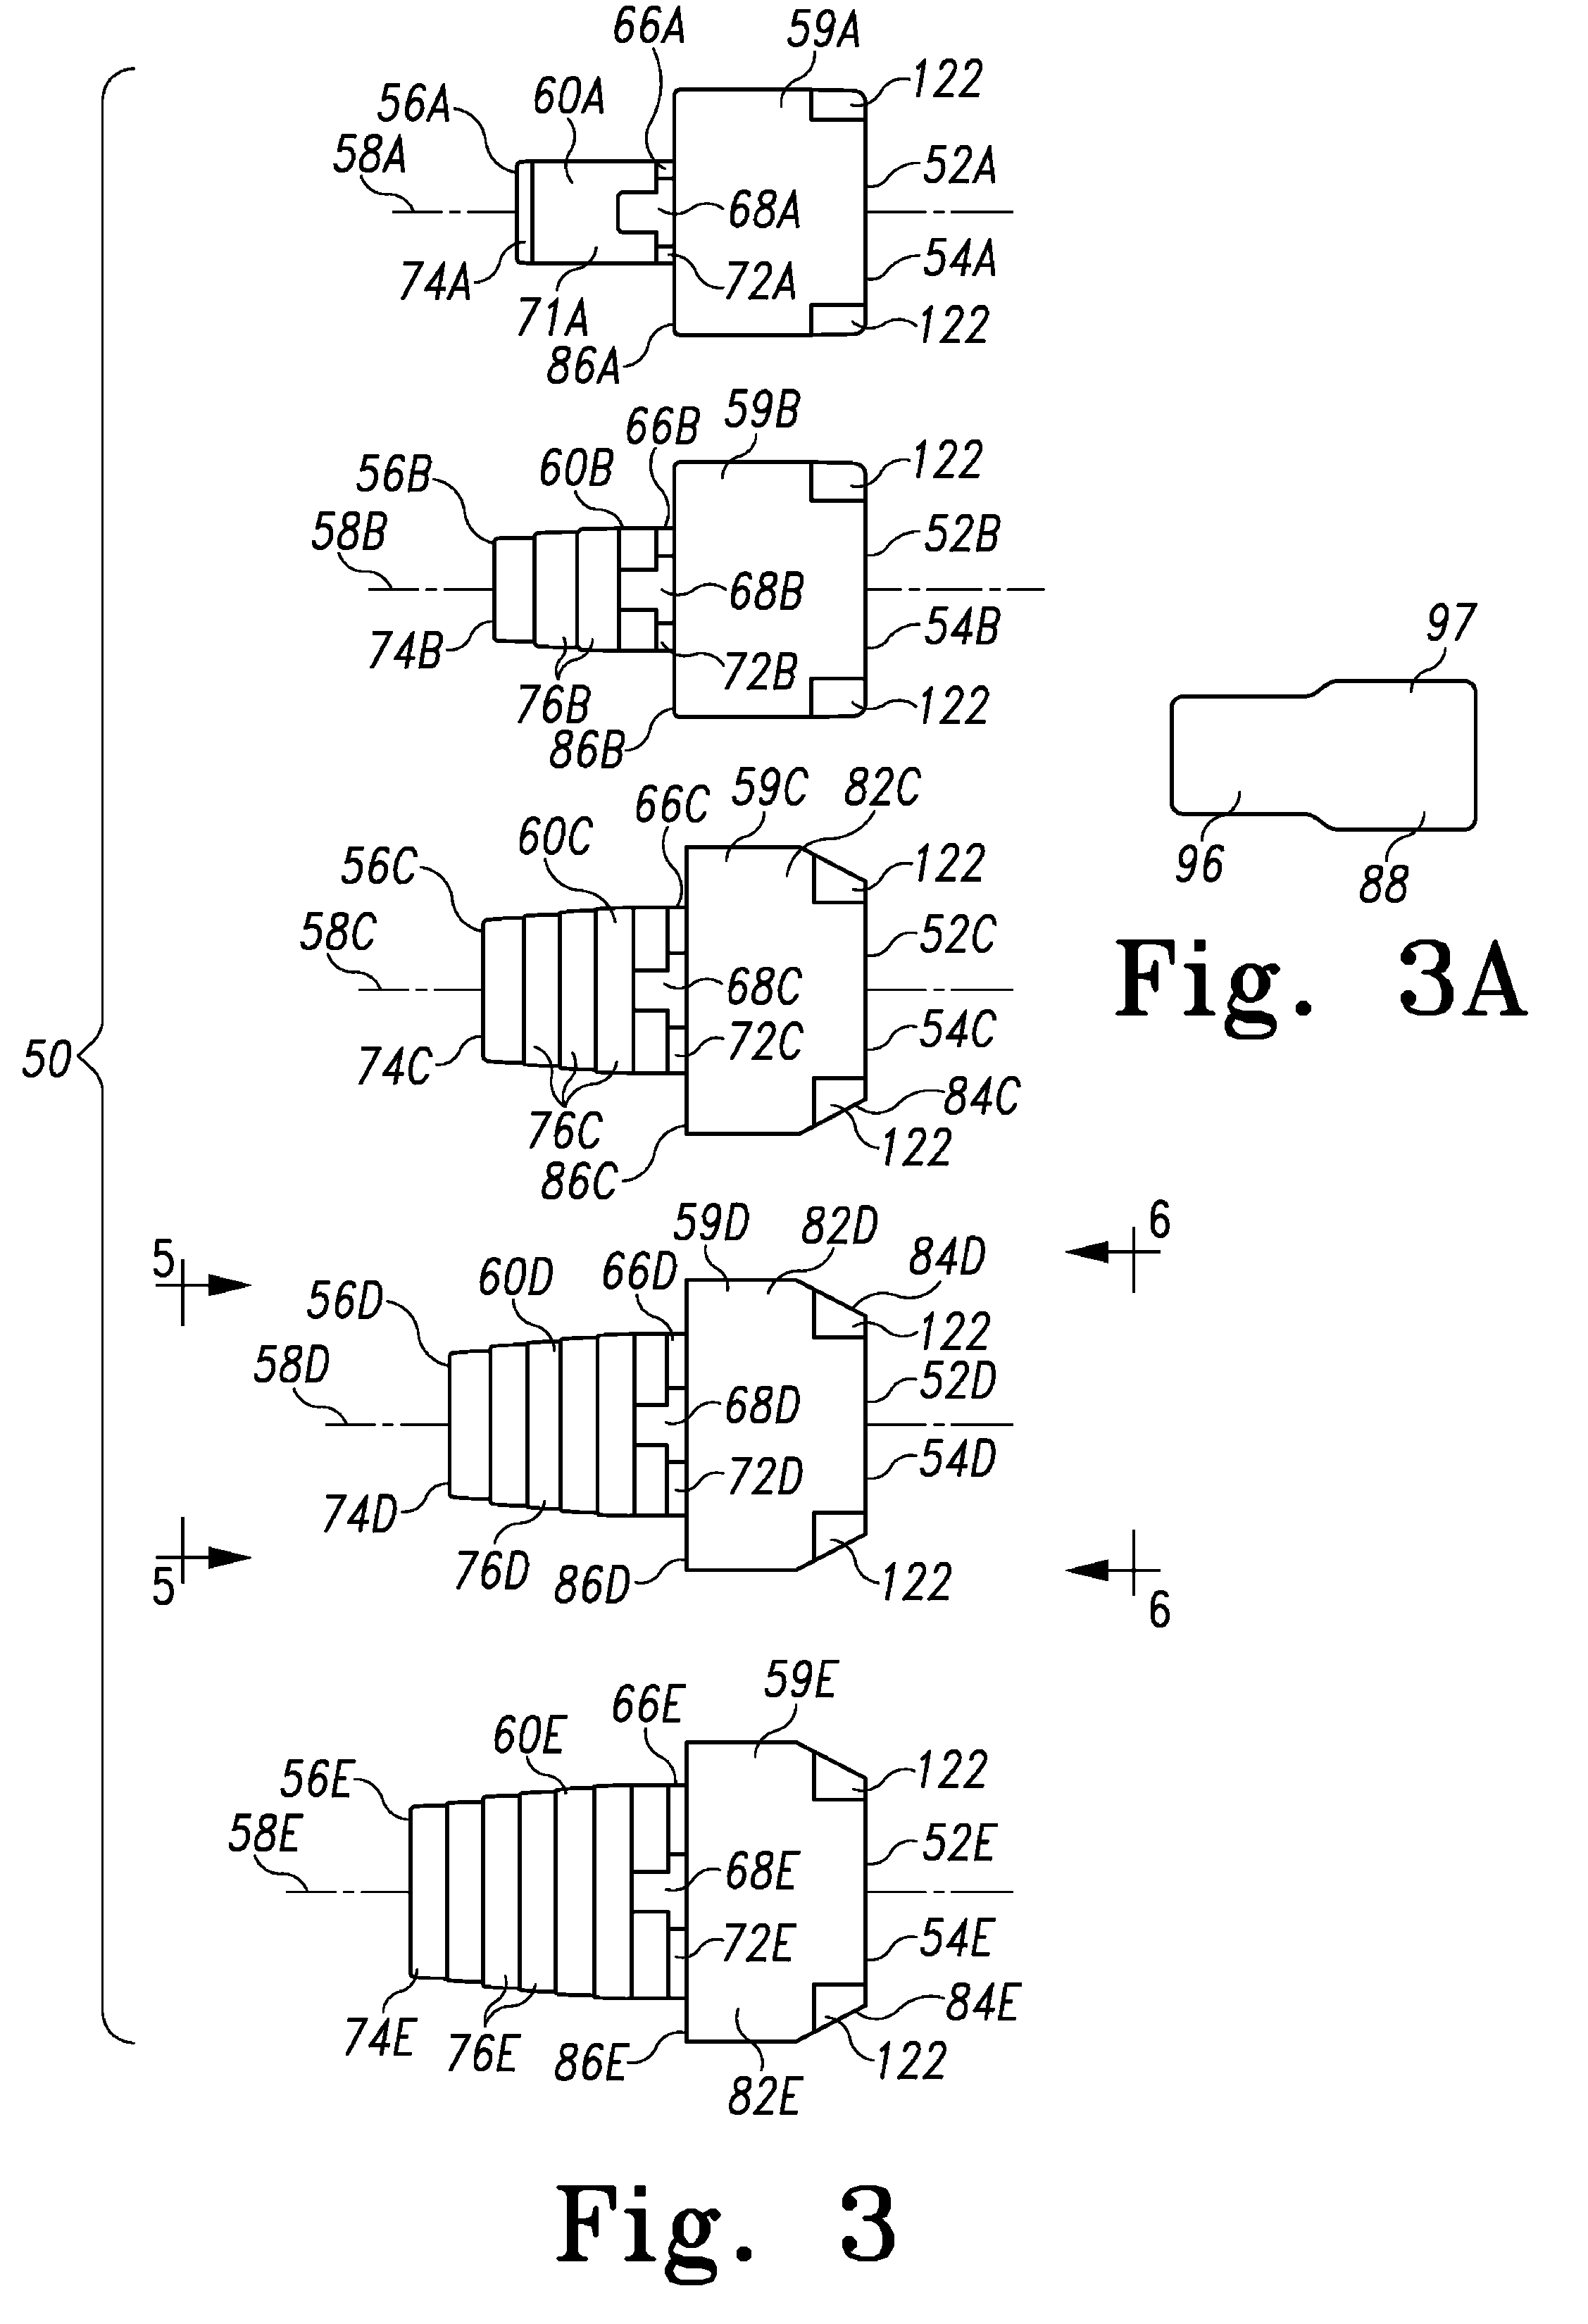 Modular implant system and method with diaphyseal implant and adapter